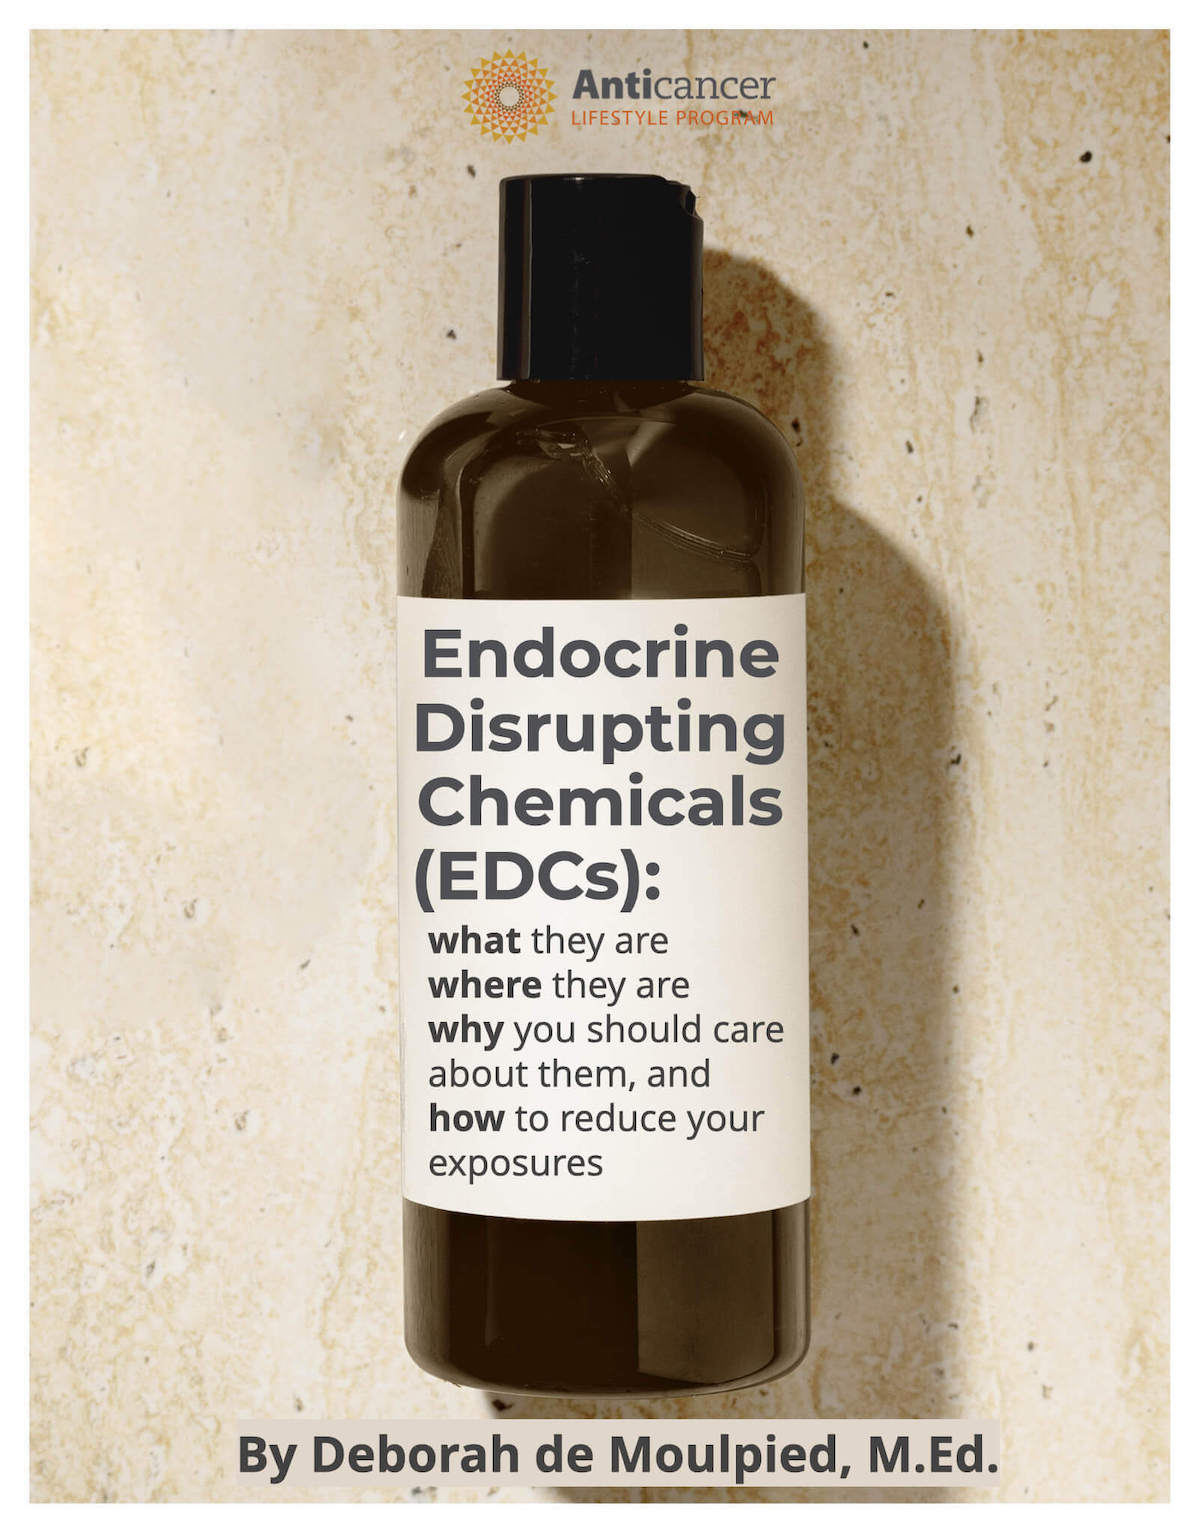 Endocrine Disrupting Chemicals (EDCs): What They Are and How to Reduce Your Exposures